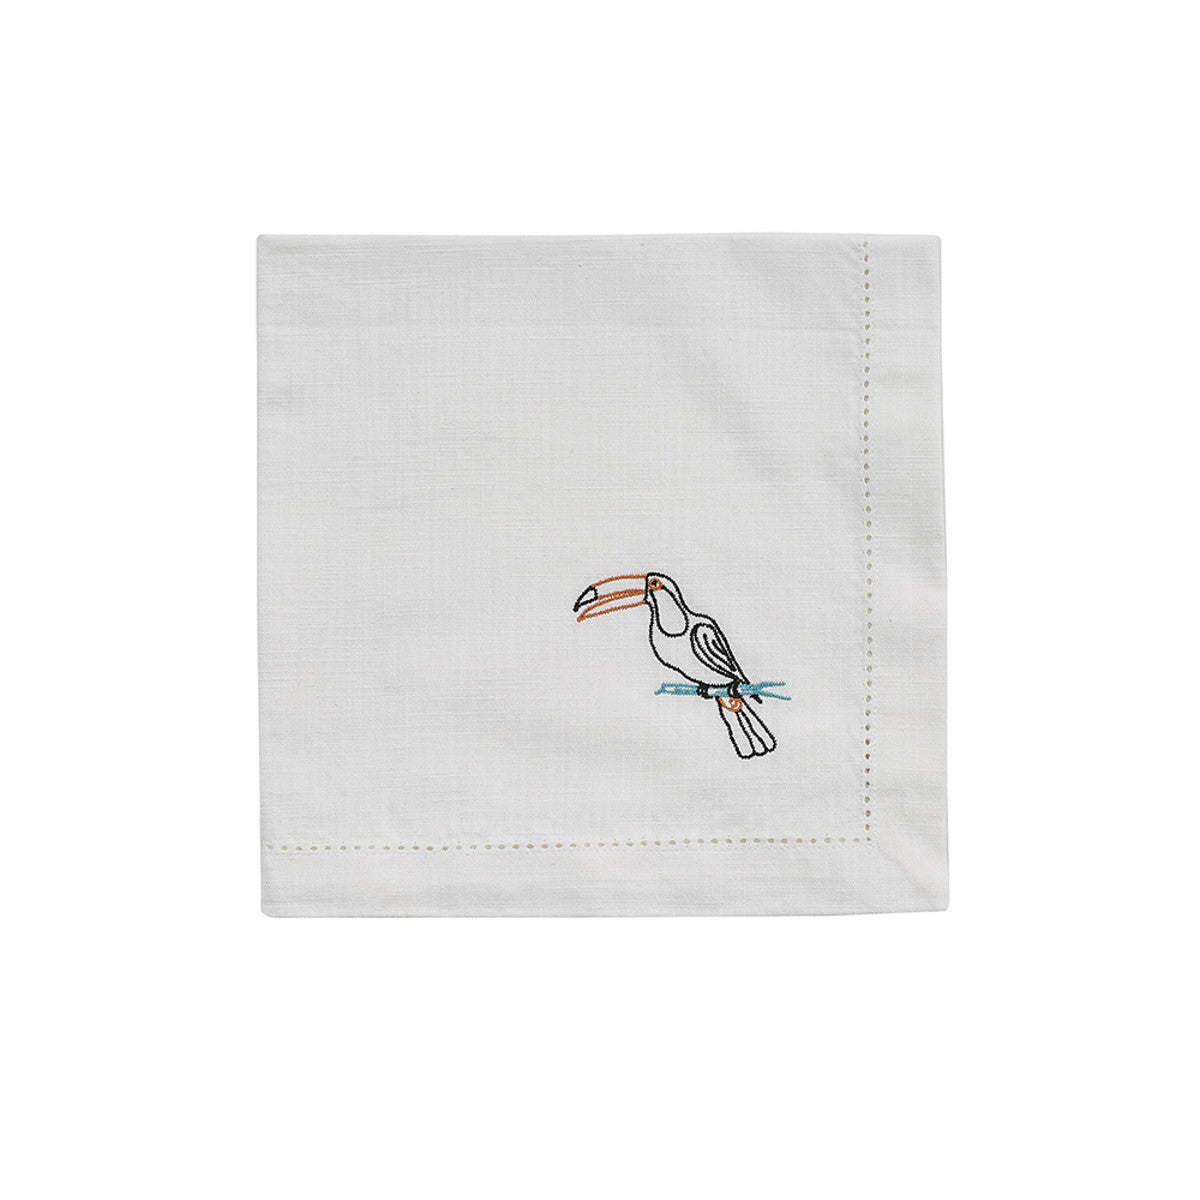 Embroidered Napkin - Toucan Set of 4  Park Designs